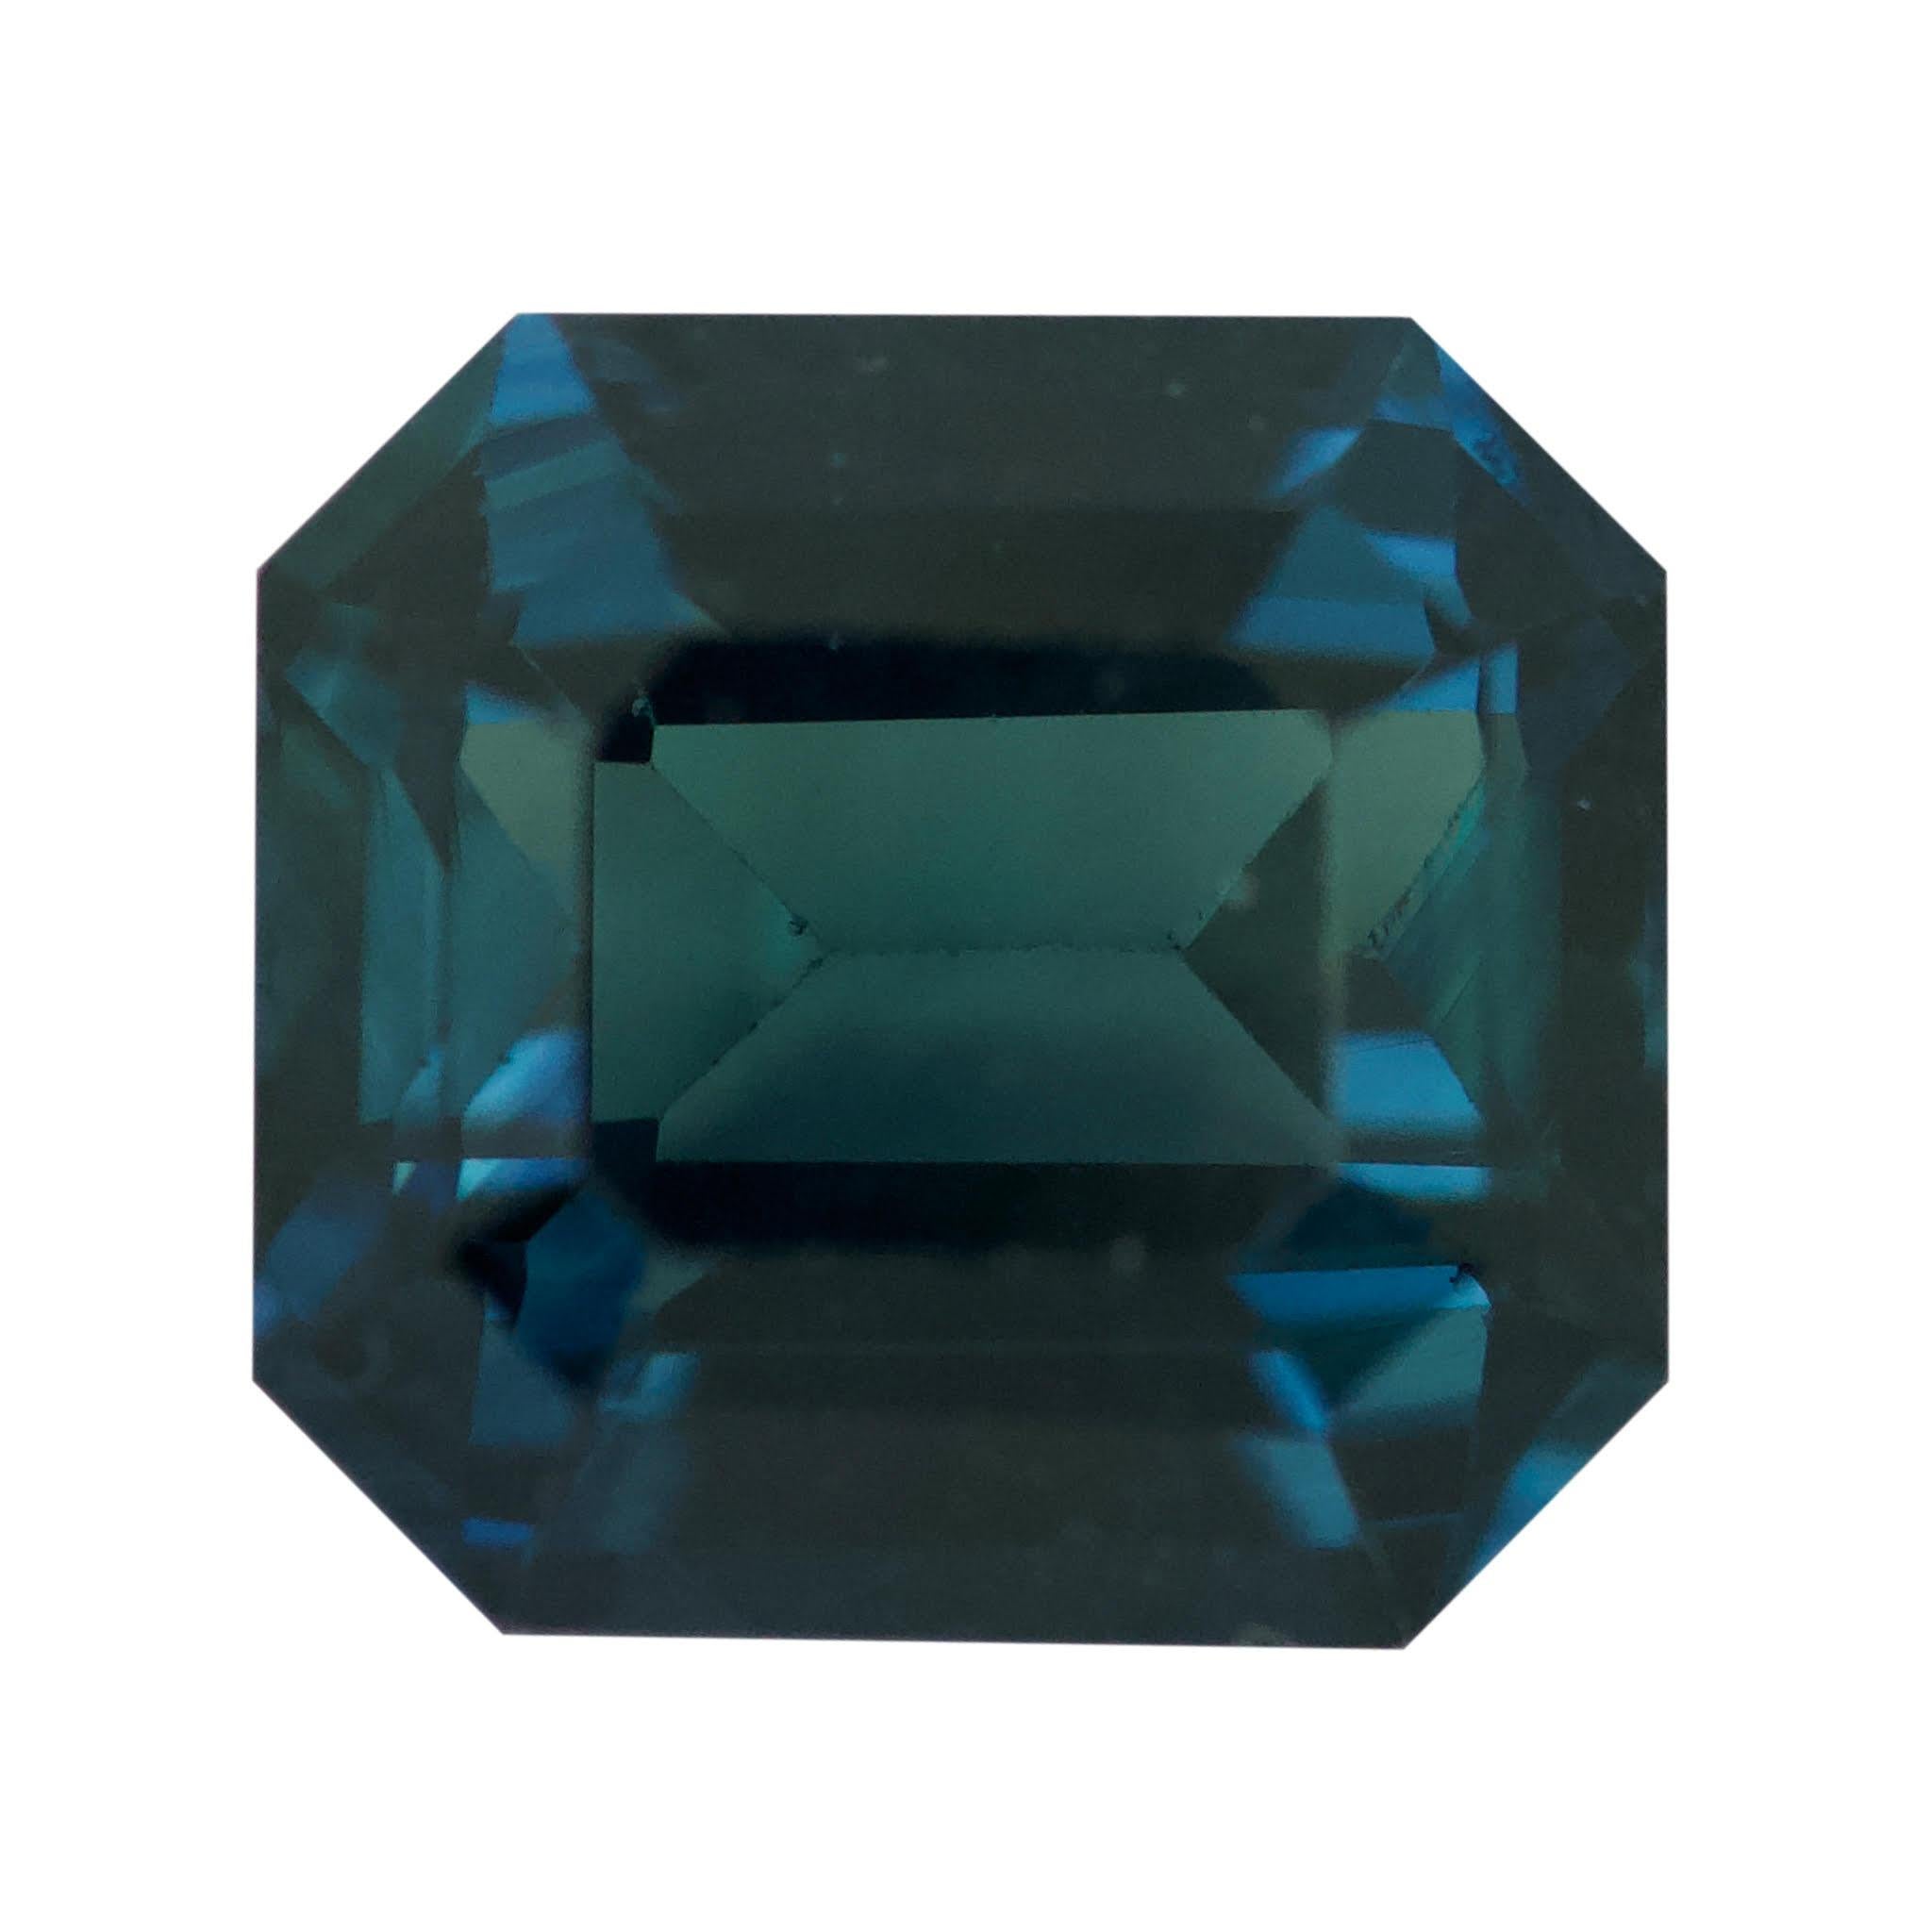 This stunning over 2 carat teal sapphire boasts a lush, deep ocean blue hue with emerald cut edges that sparkle with brilliance. Its size and intensity make it a truly impressive piece that will bring a touch of luxury to any occasion.

Colour and